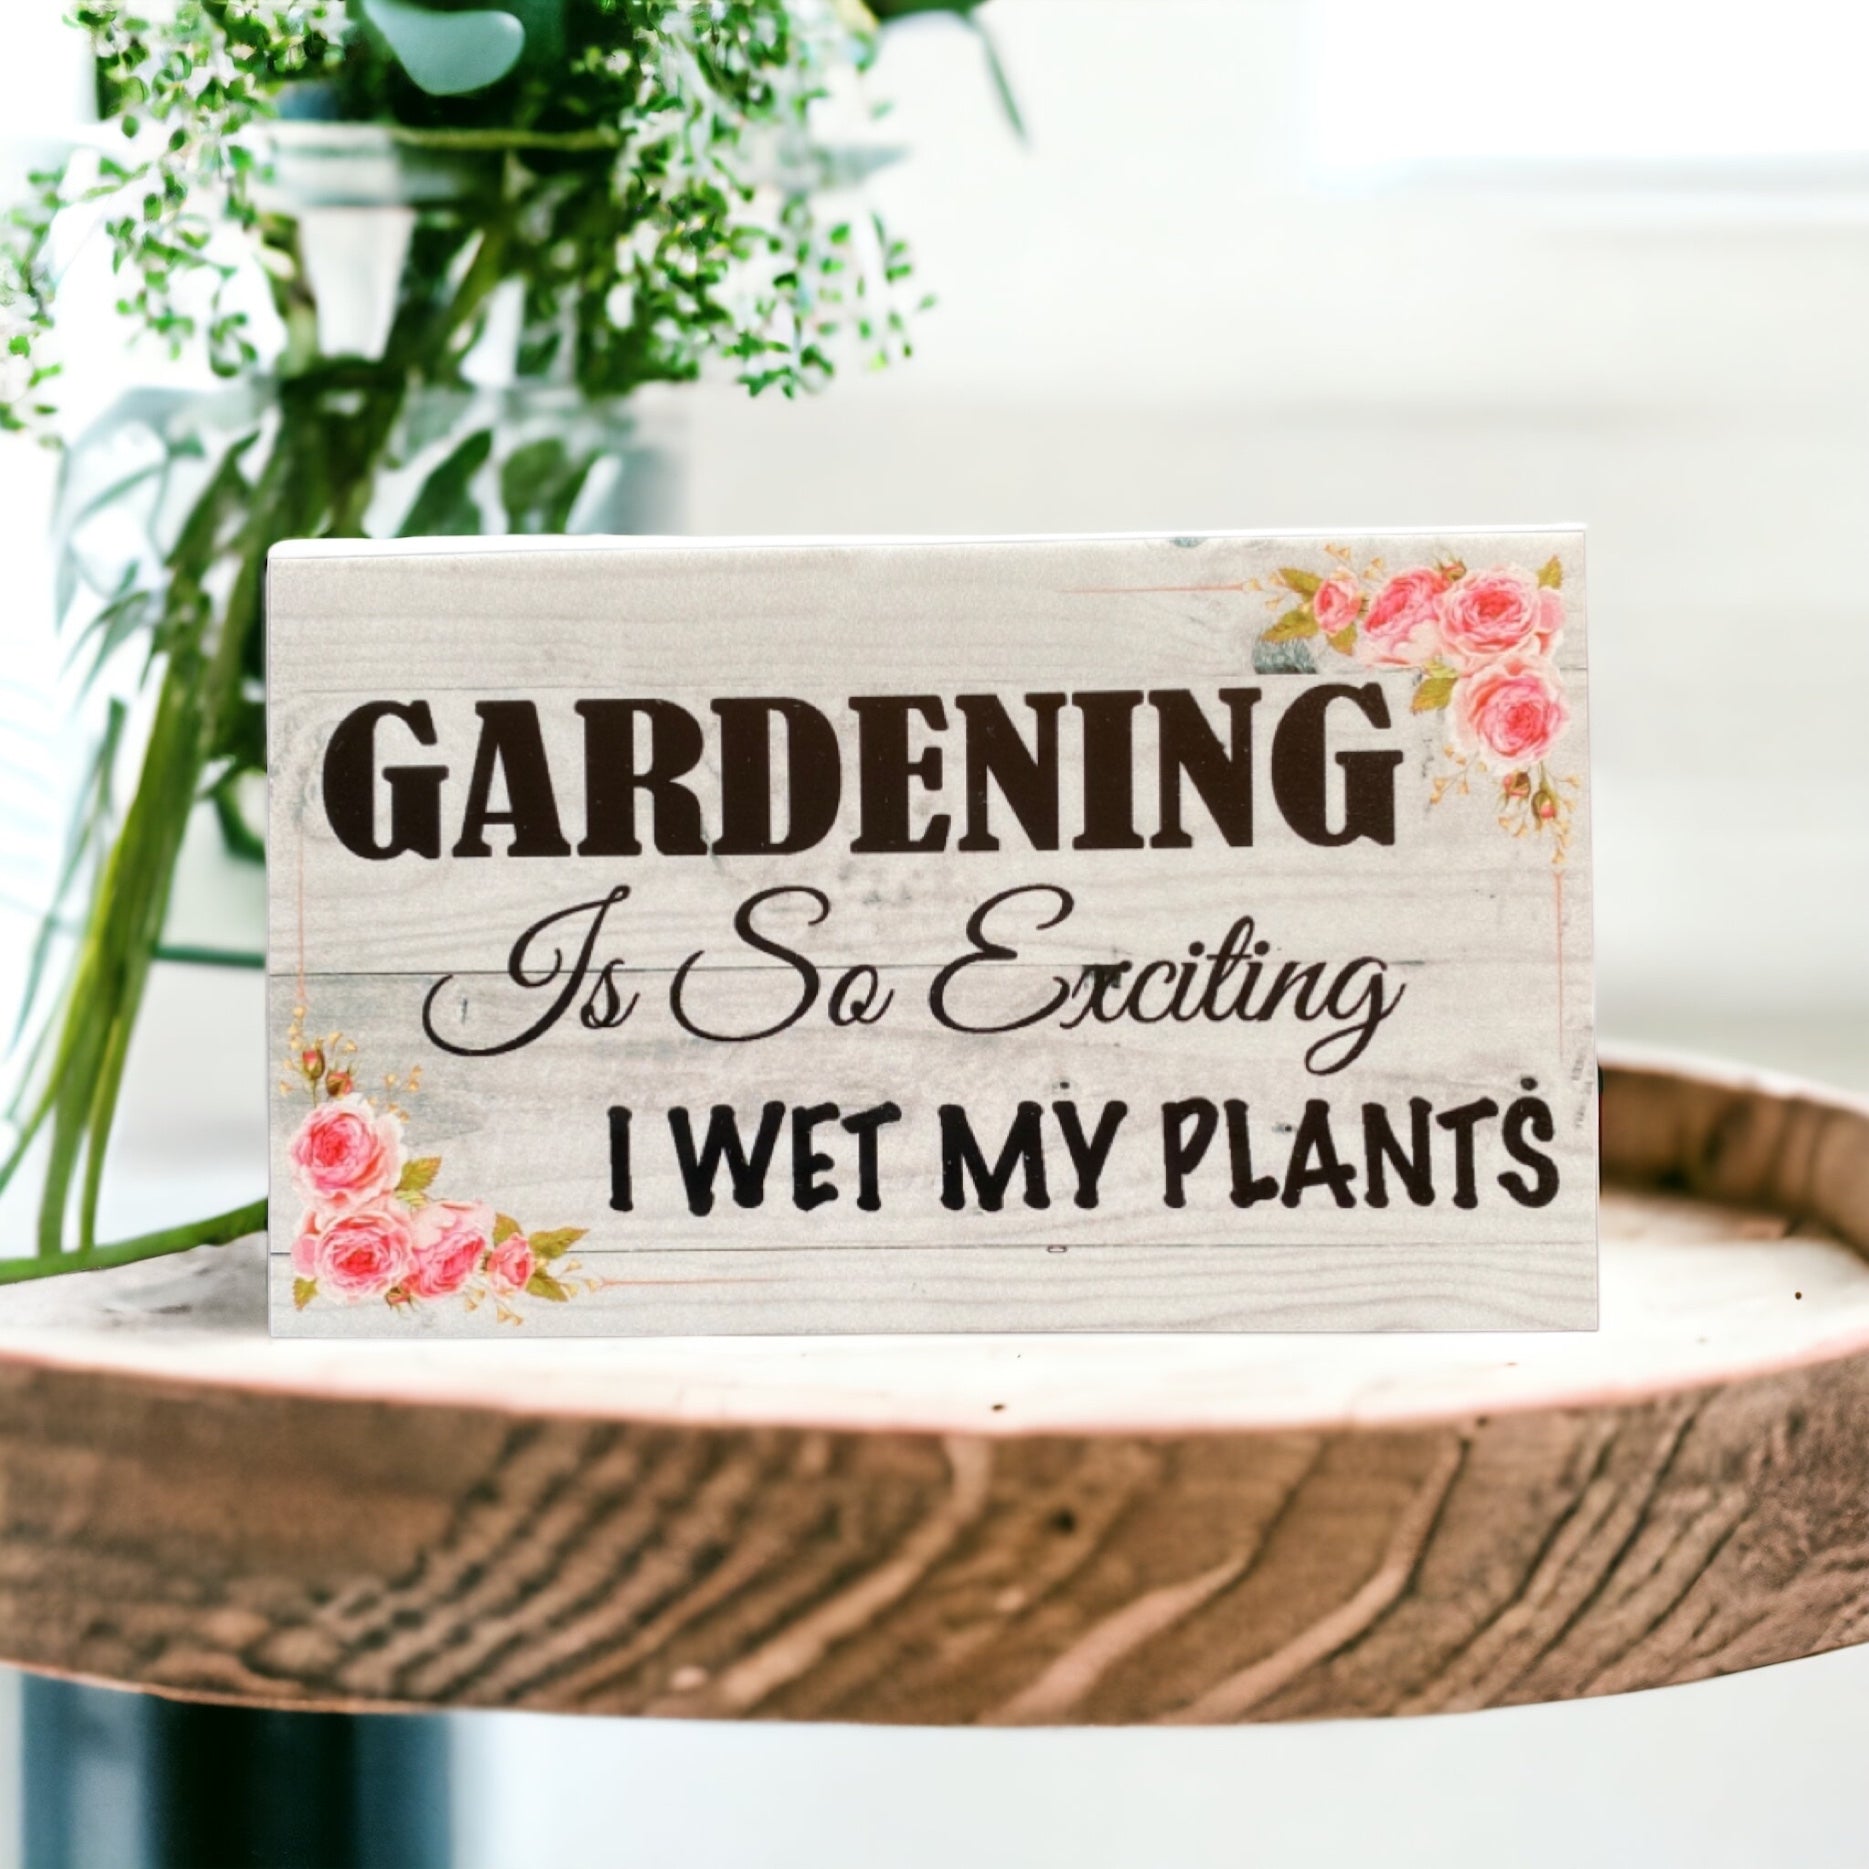 Gardening Exciting Wet My Plants Funny Gardener Sign - The Renmy Store Homewares & Gifts 